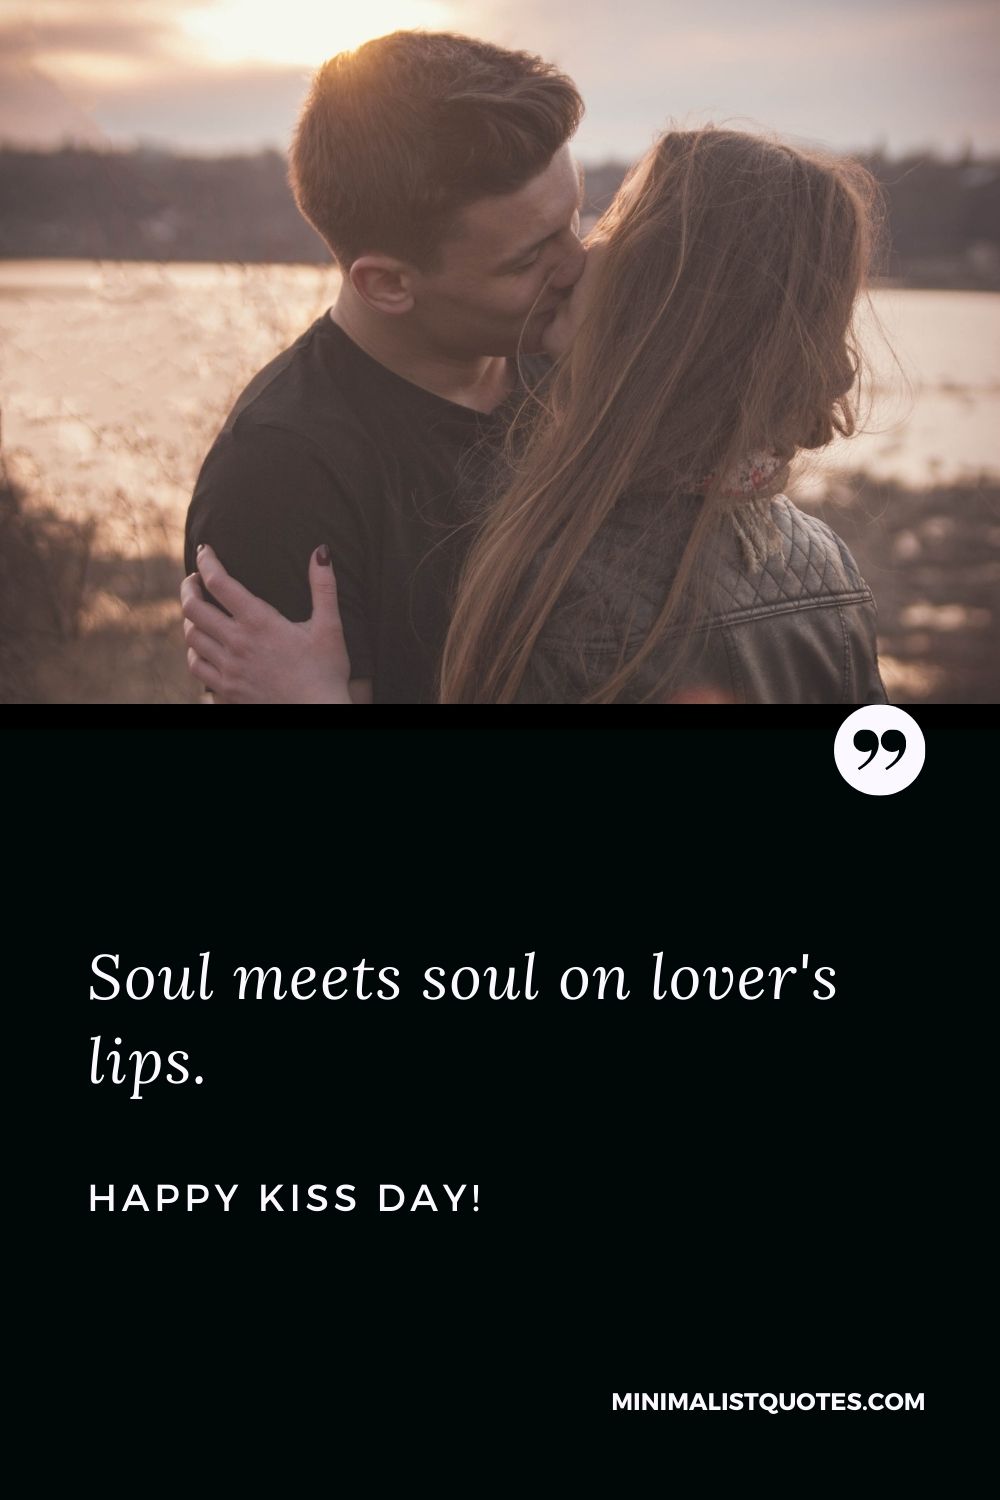 Soul meets soul on lover's lips. Happy Kiss Day!